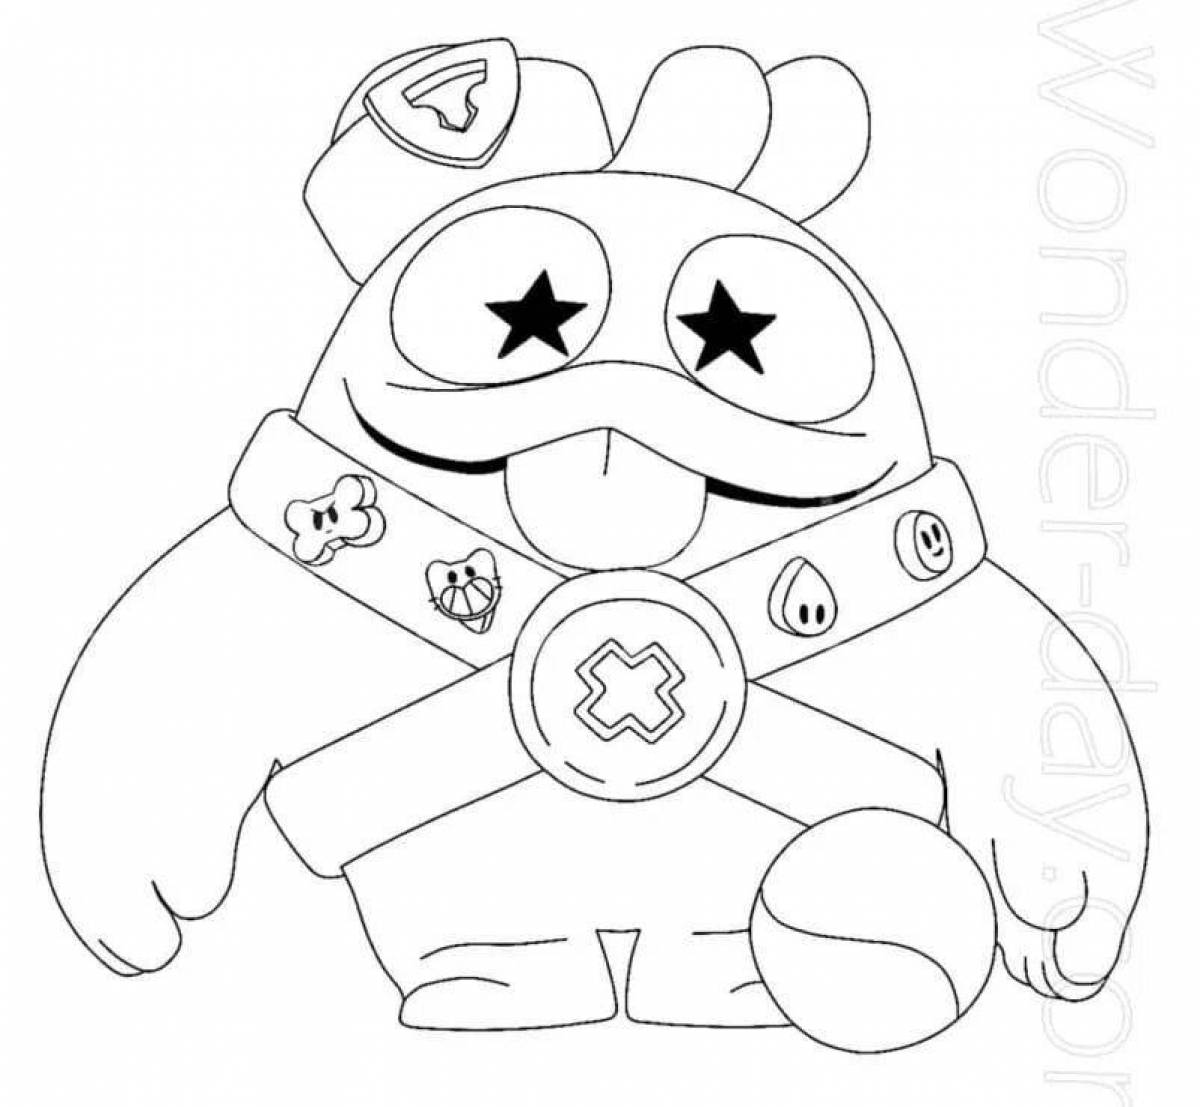 Sparkling brawl stars coloring page